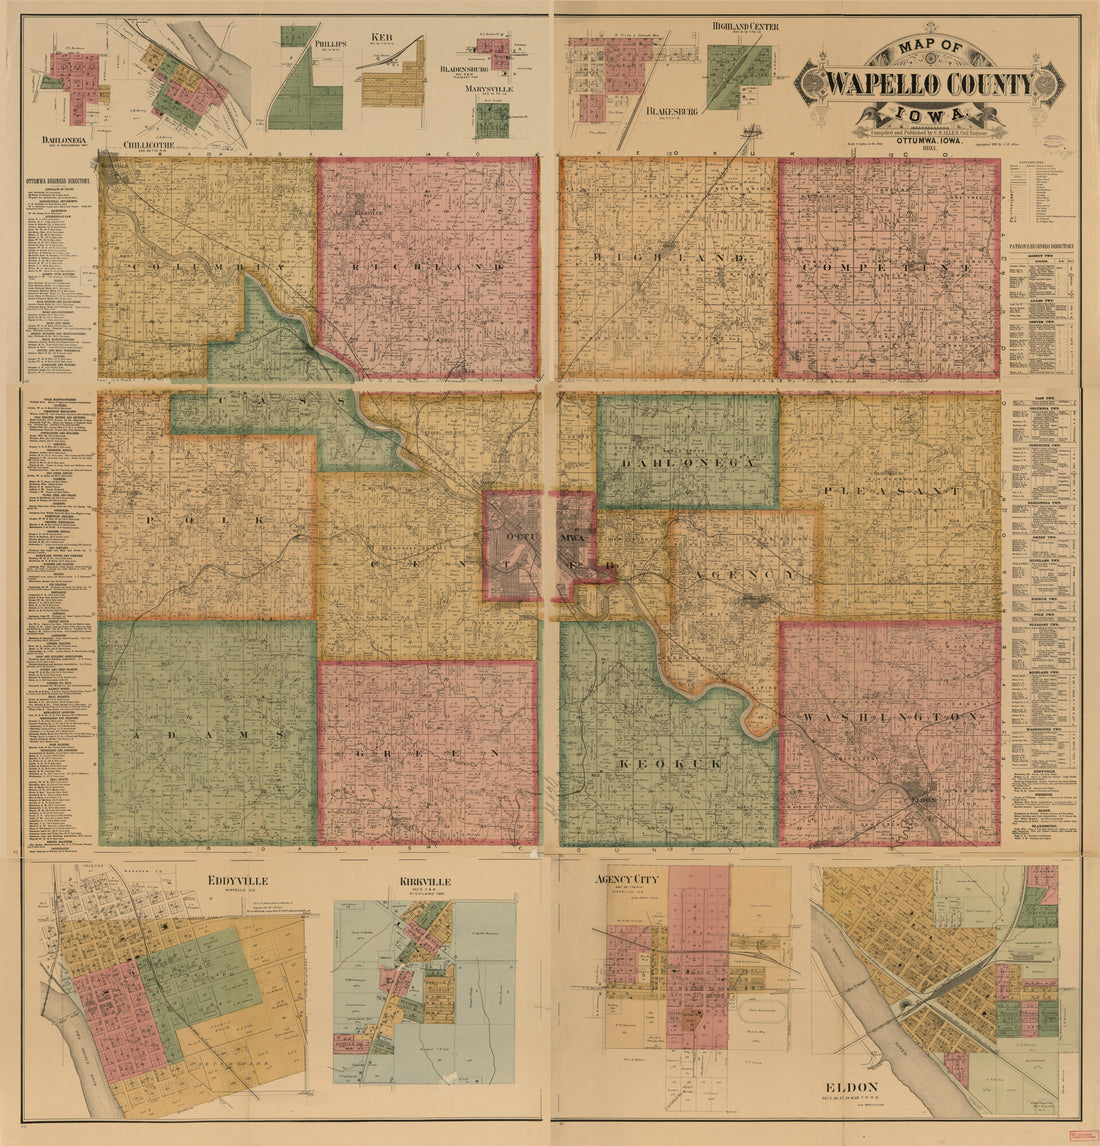 This old map of Map of Wapello County, Iowa from 1893 was created by C. R. Allen in 1893